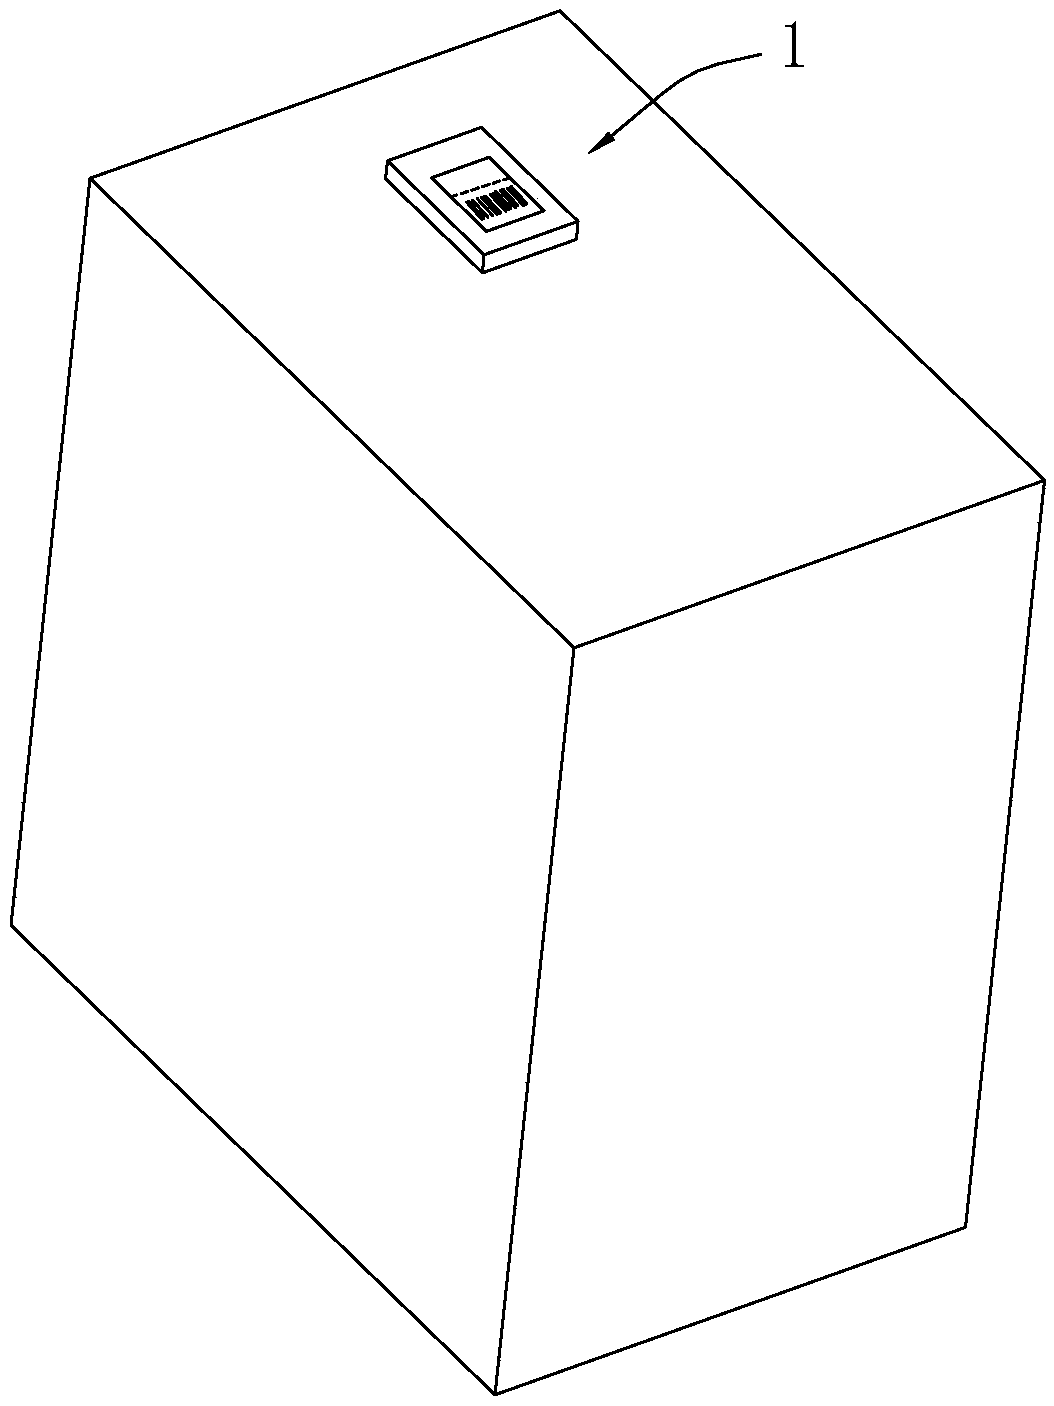 An electronic test tag and a test method of a concrete test block